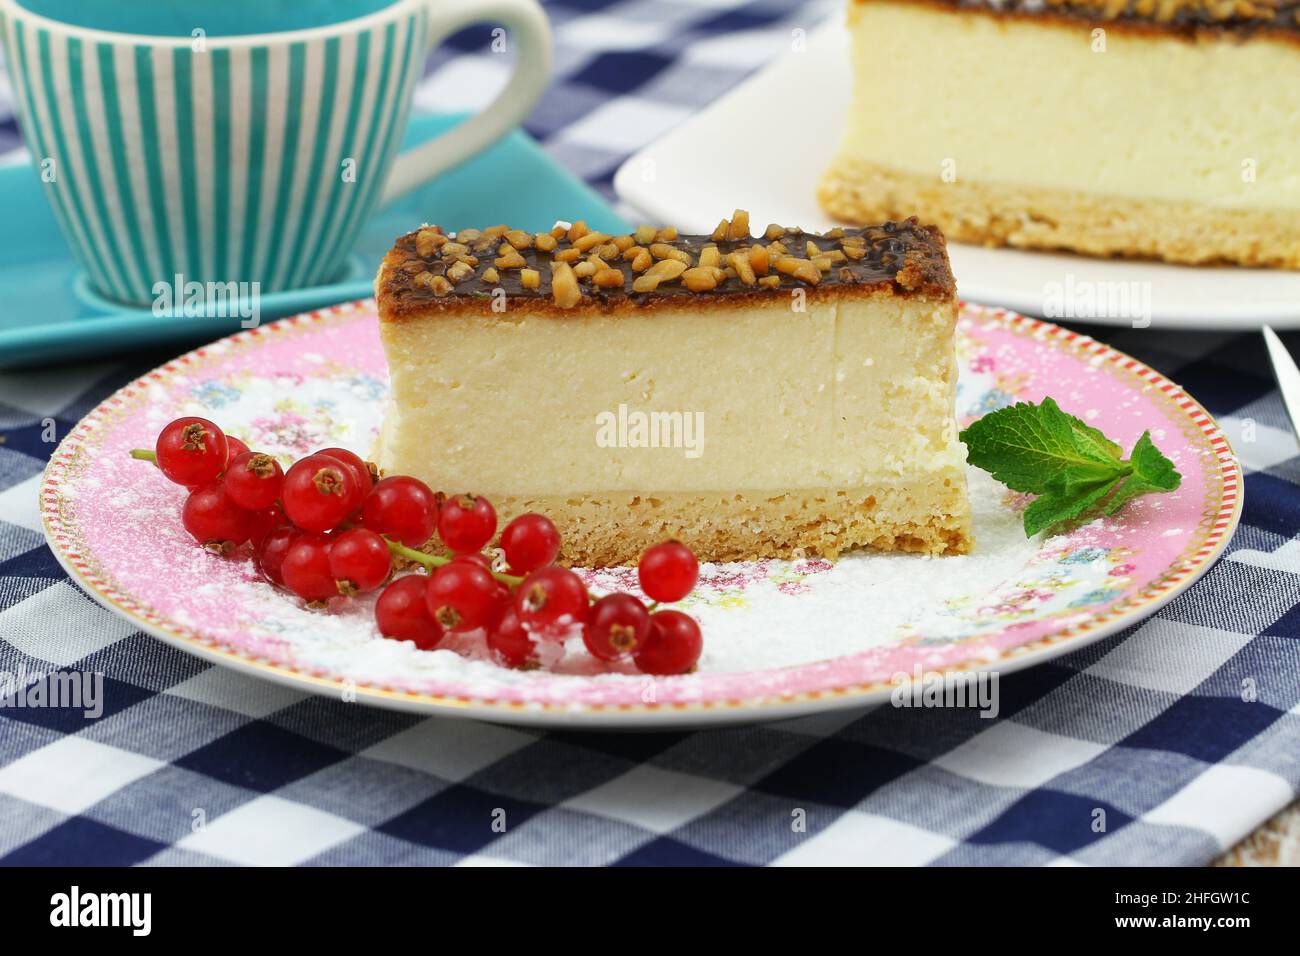 Traditional baked cheesecake with chocolate topping and nuts Stock Photo